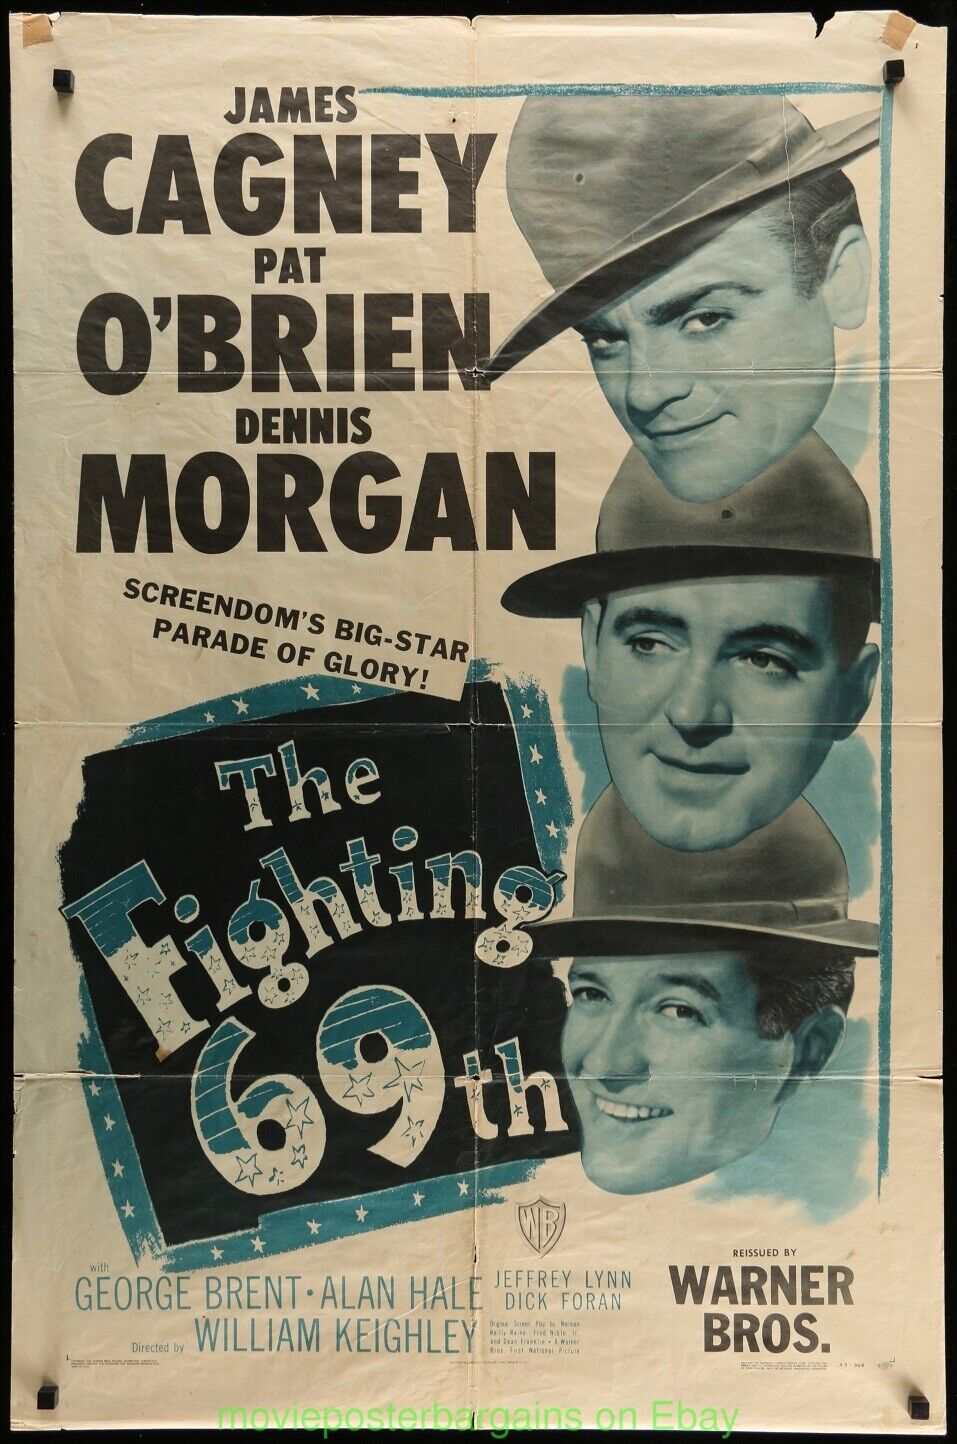 THE FIGHTING 69TH MOVIE POSTER Original 27x41 JAMES CAGNEY WWI Re-Release 1948